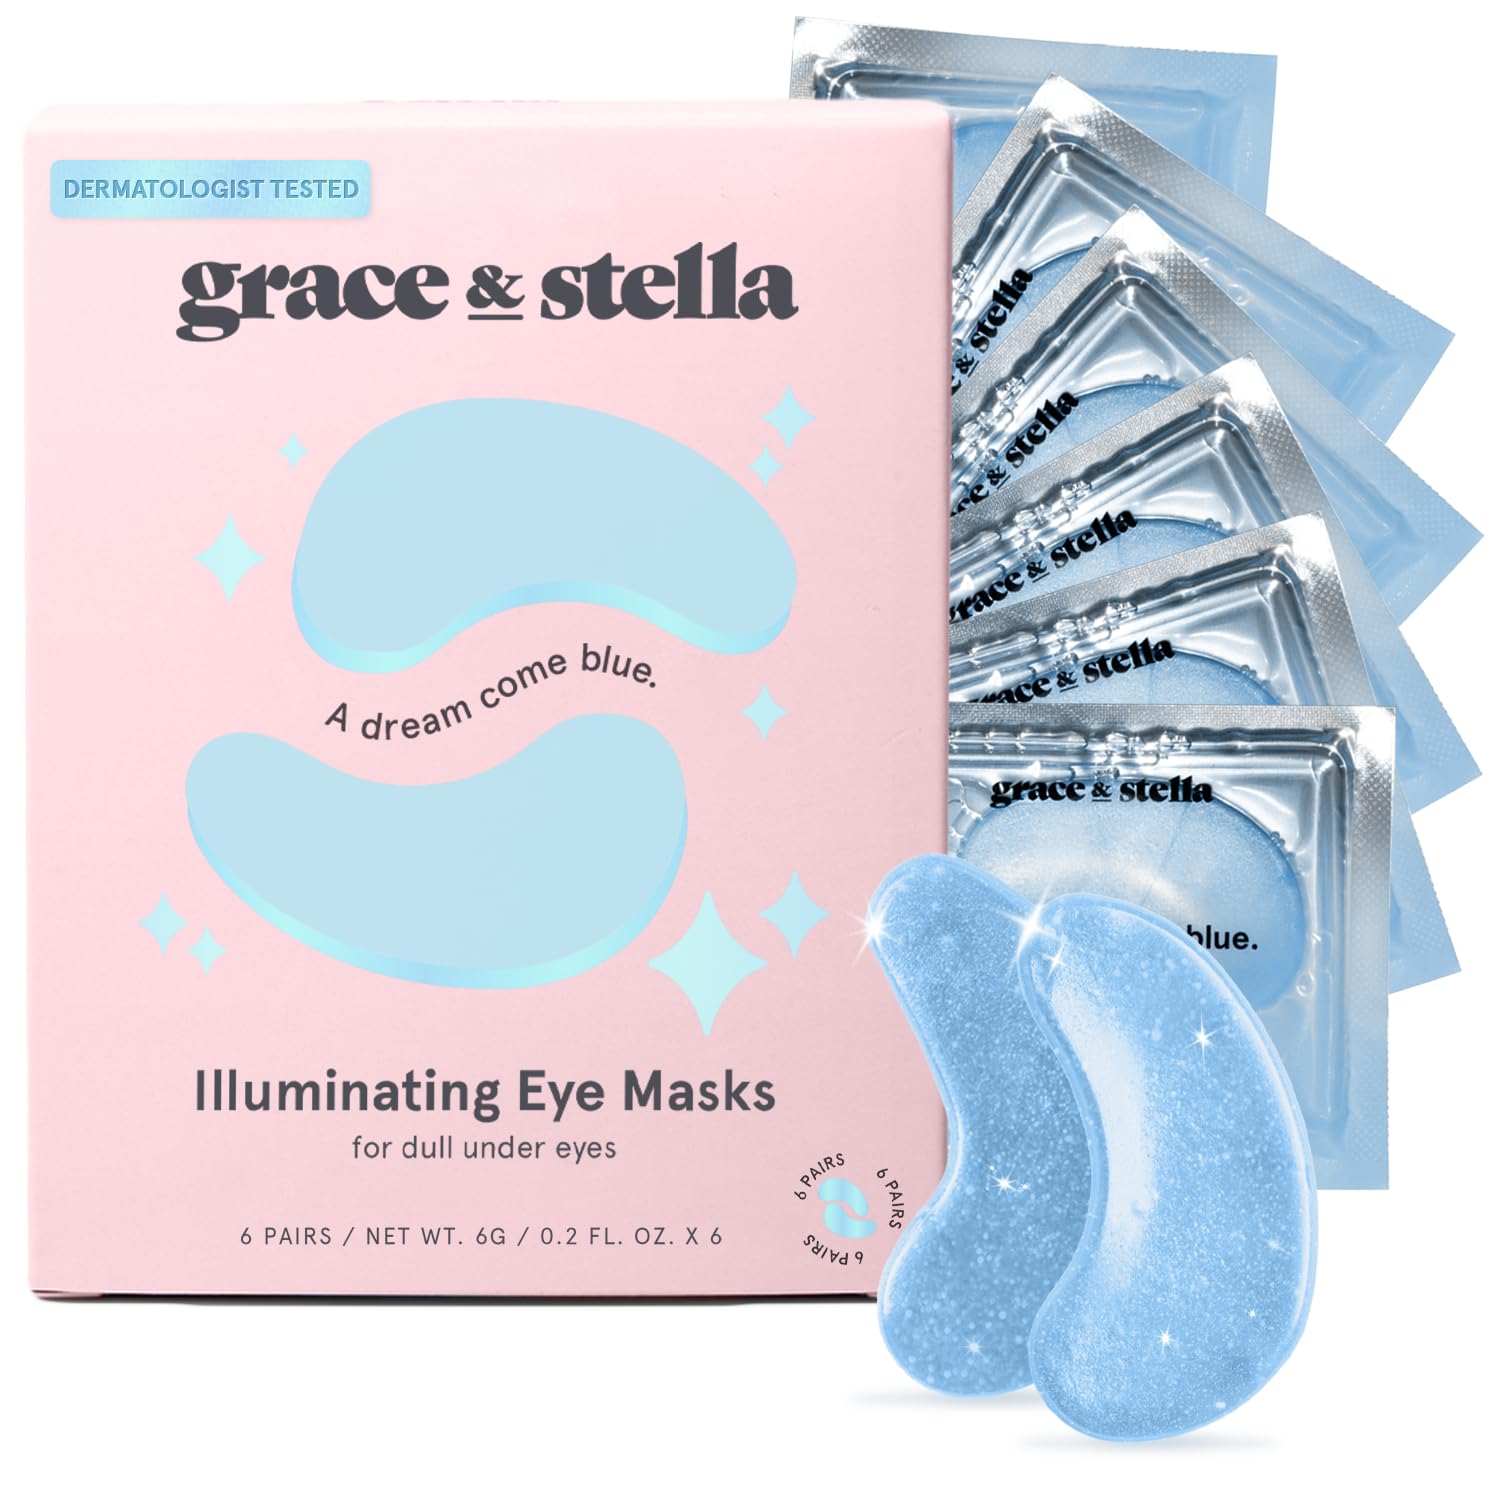 Refresh and Revitalize with Eye Mask Efficacy